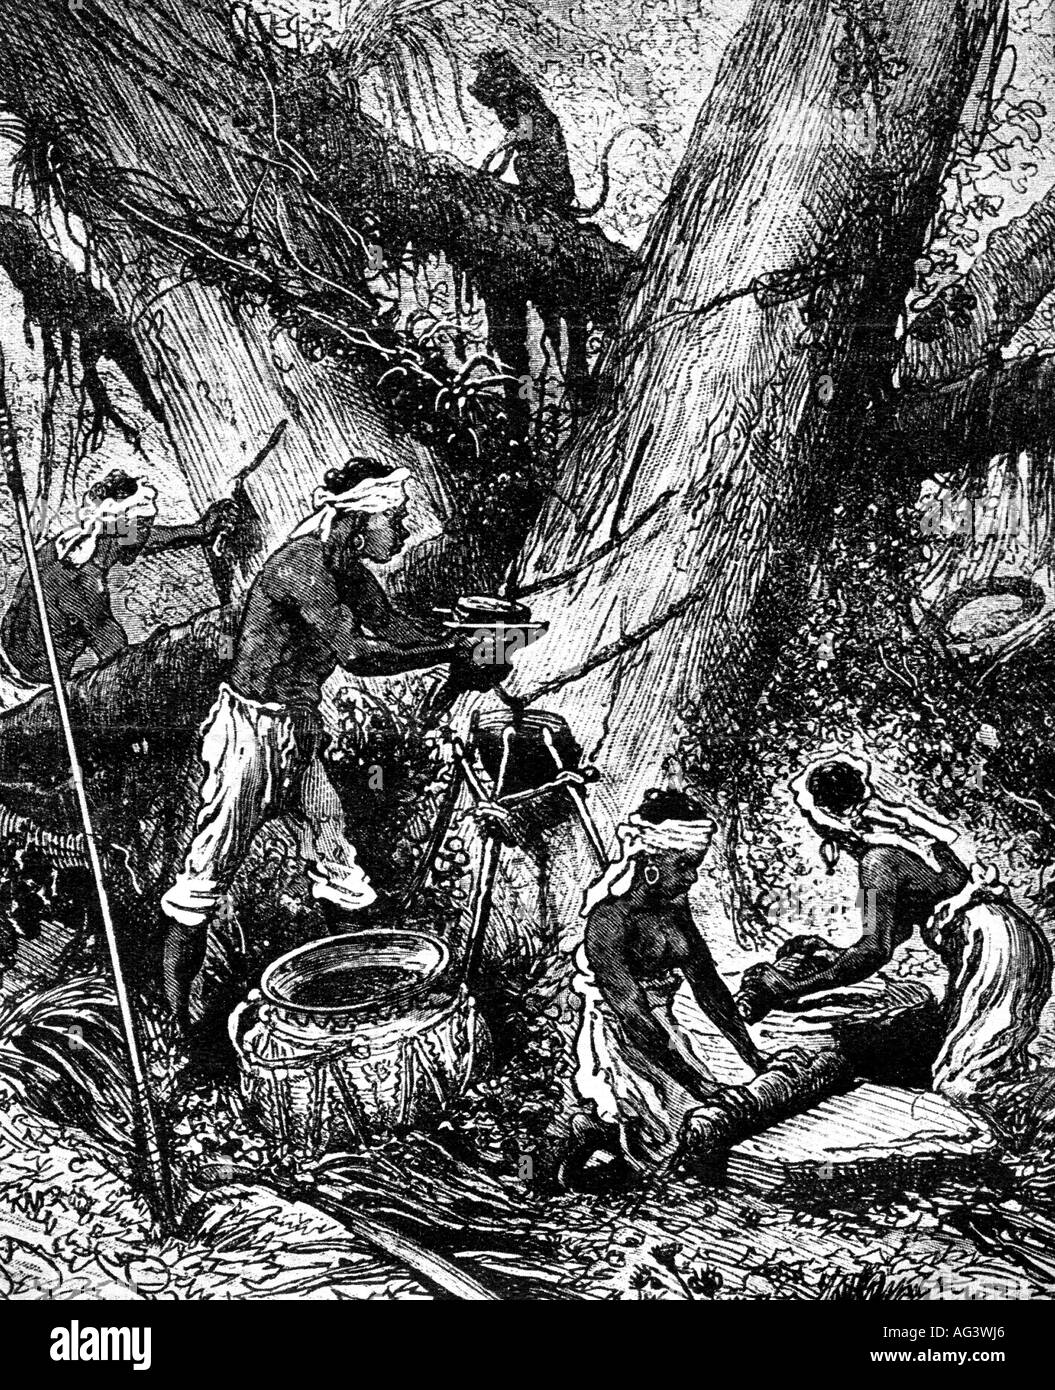 geography/travel, Brazil, agriculture, latex harvest, engraving, 19th century, South America, workers, rubber tree, historic, historical, SOAM, people, Stock Photo